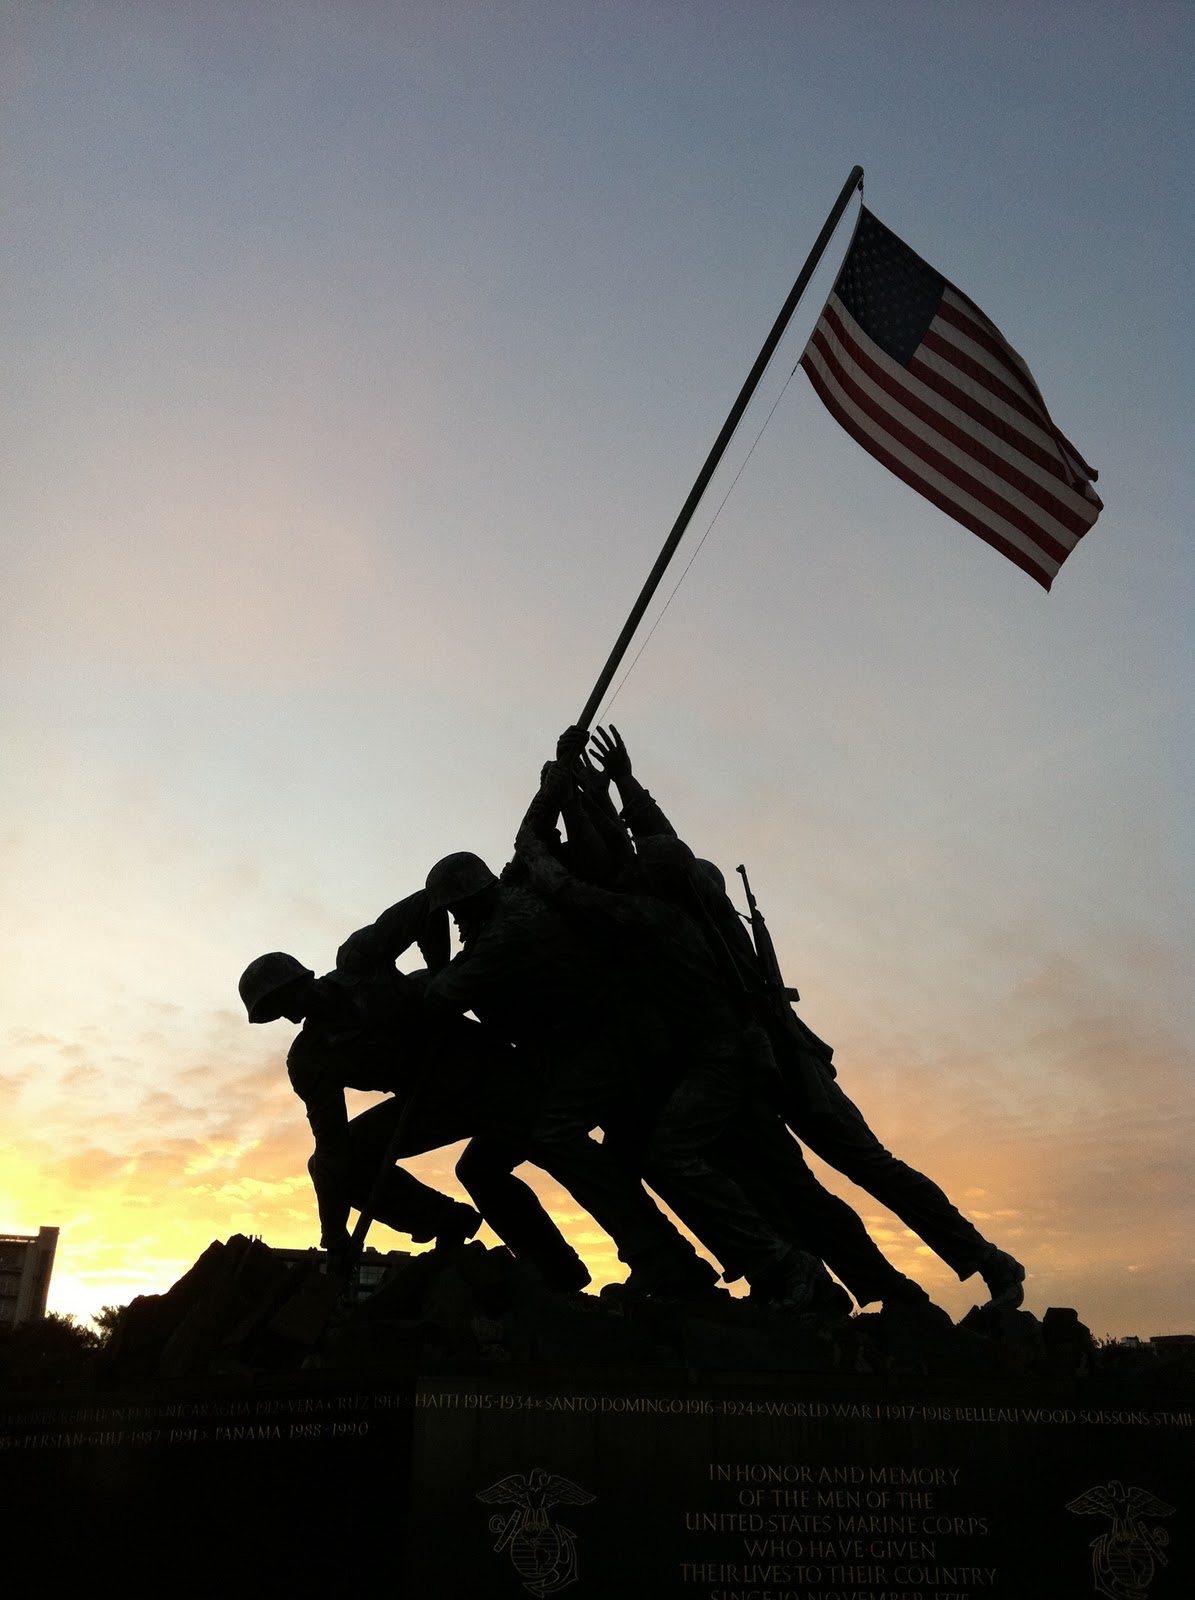 T and S: Iwo Jima Monument